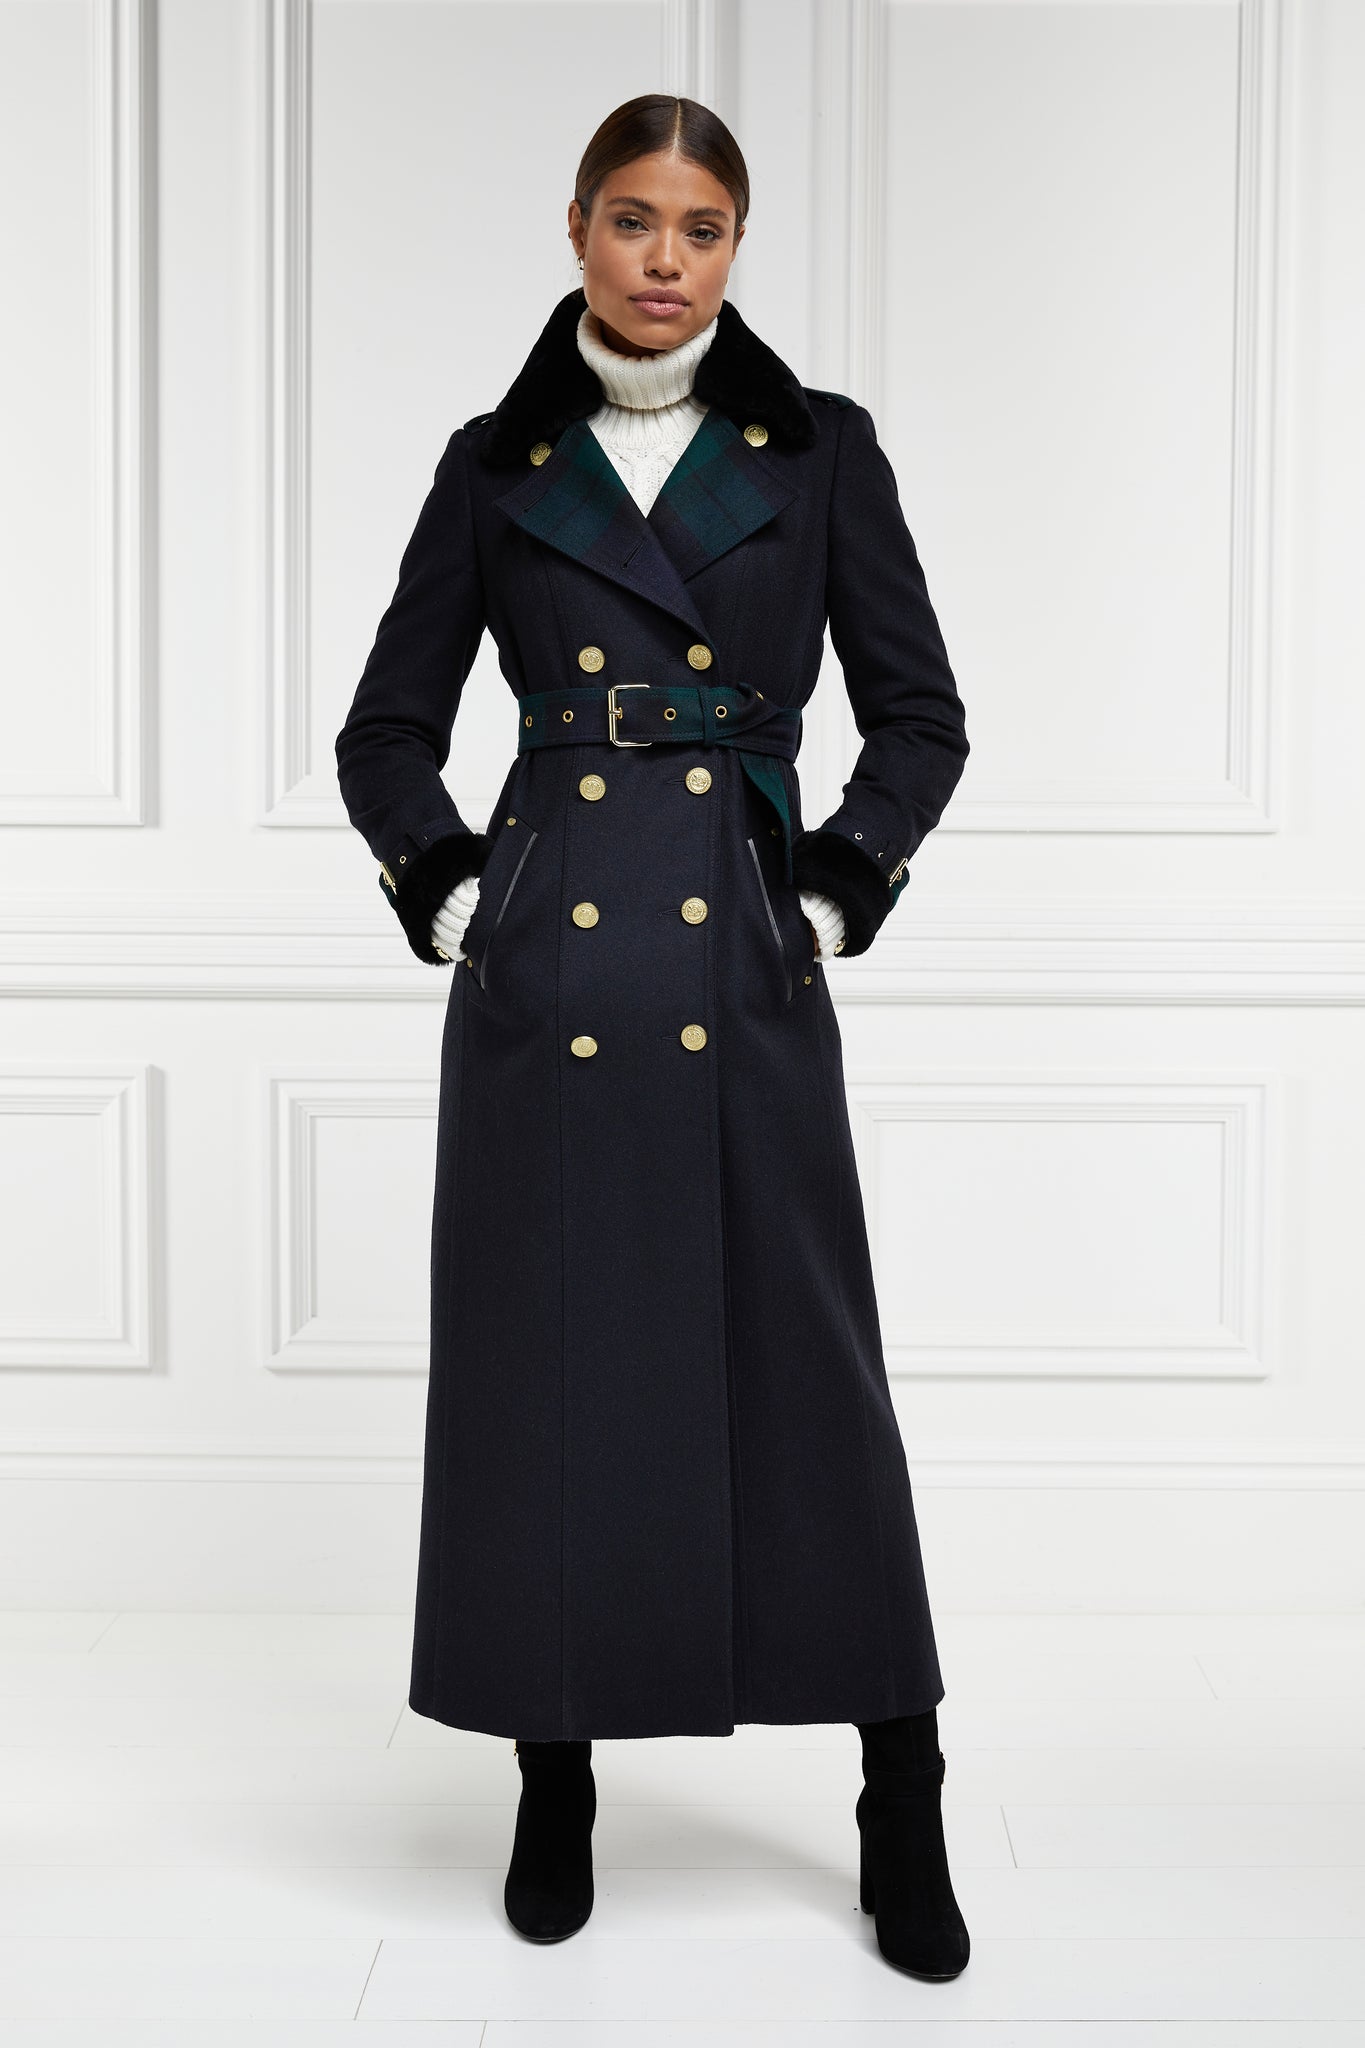 womens navy and green blackwatch houndstooth double breasted full length trench coat with black faux fur collar and cuffs